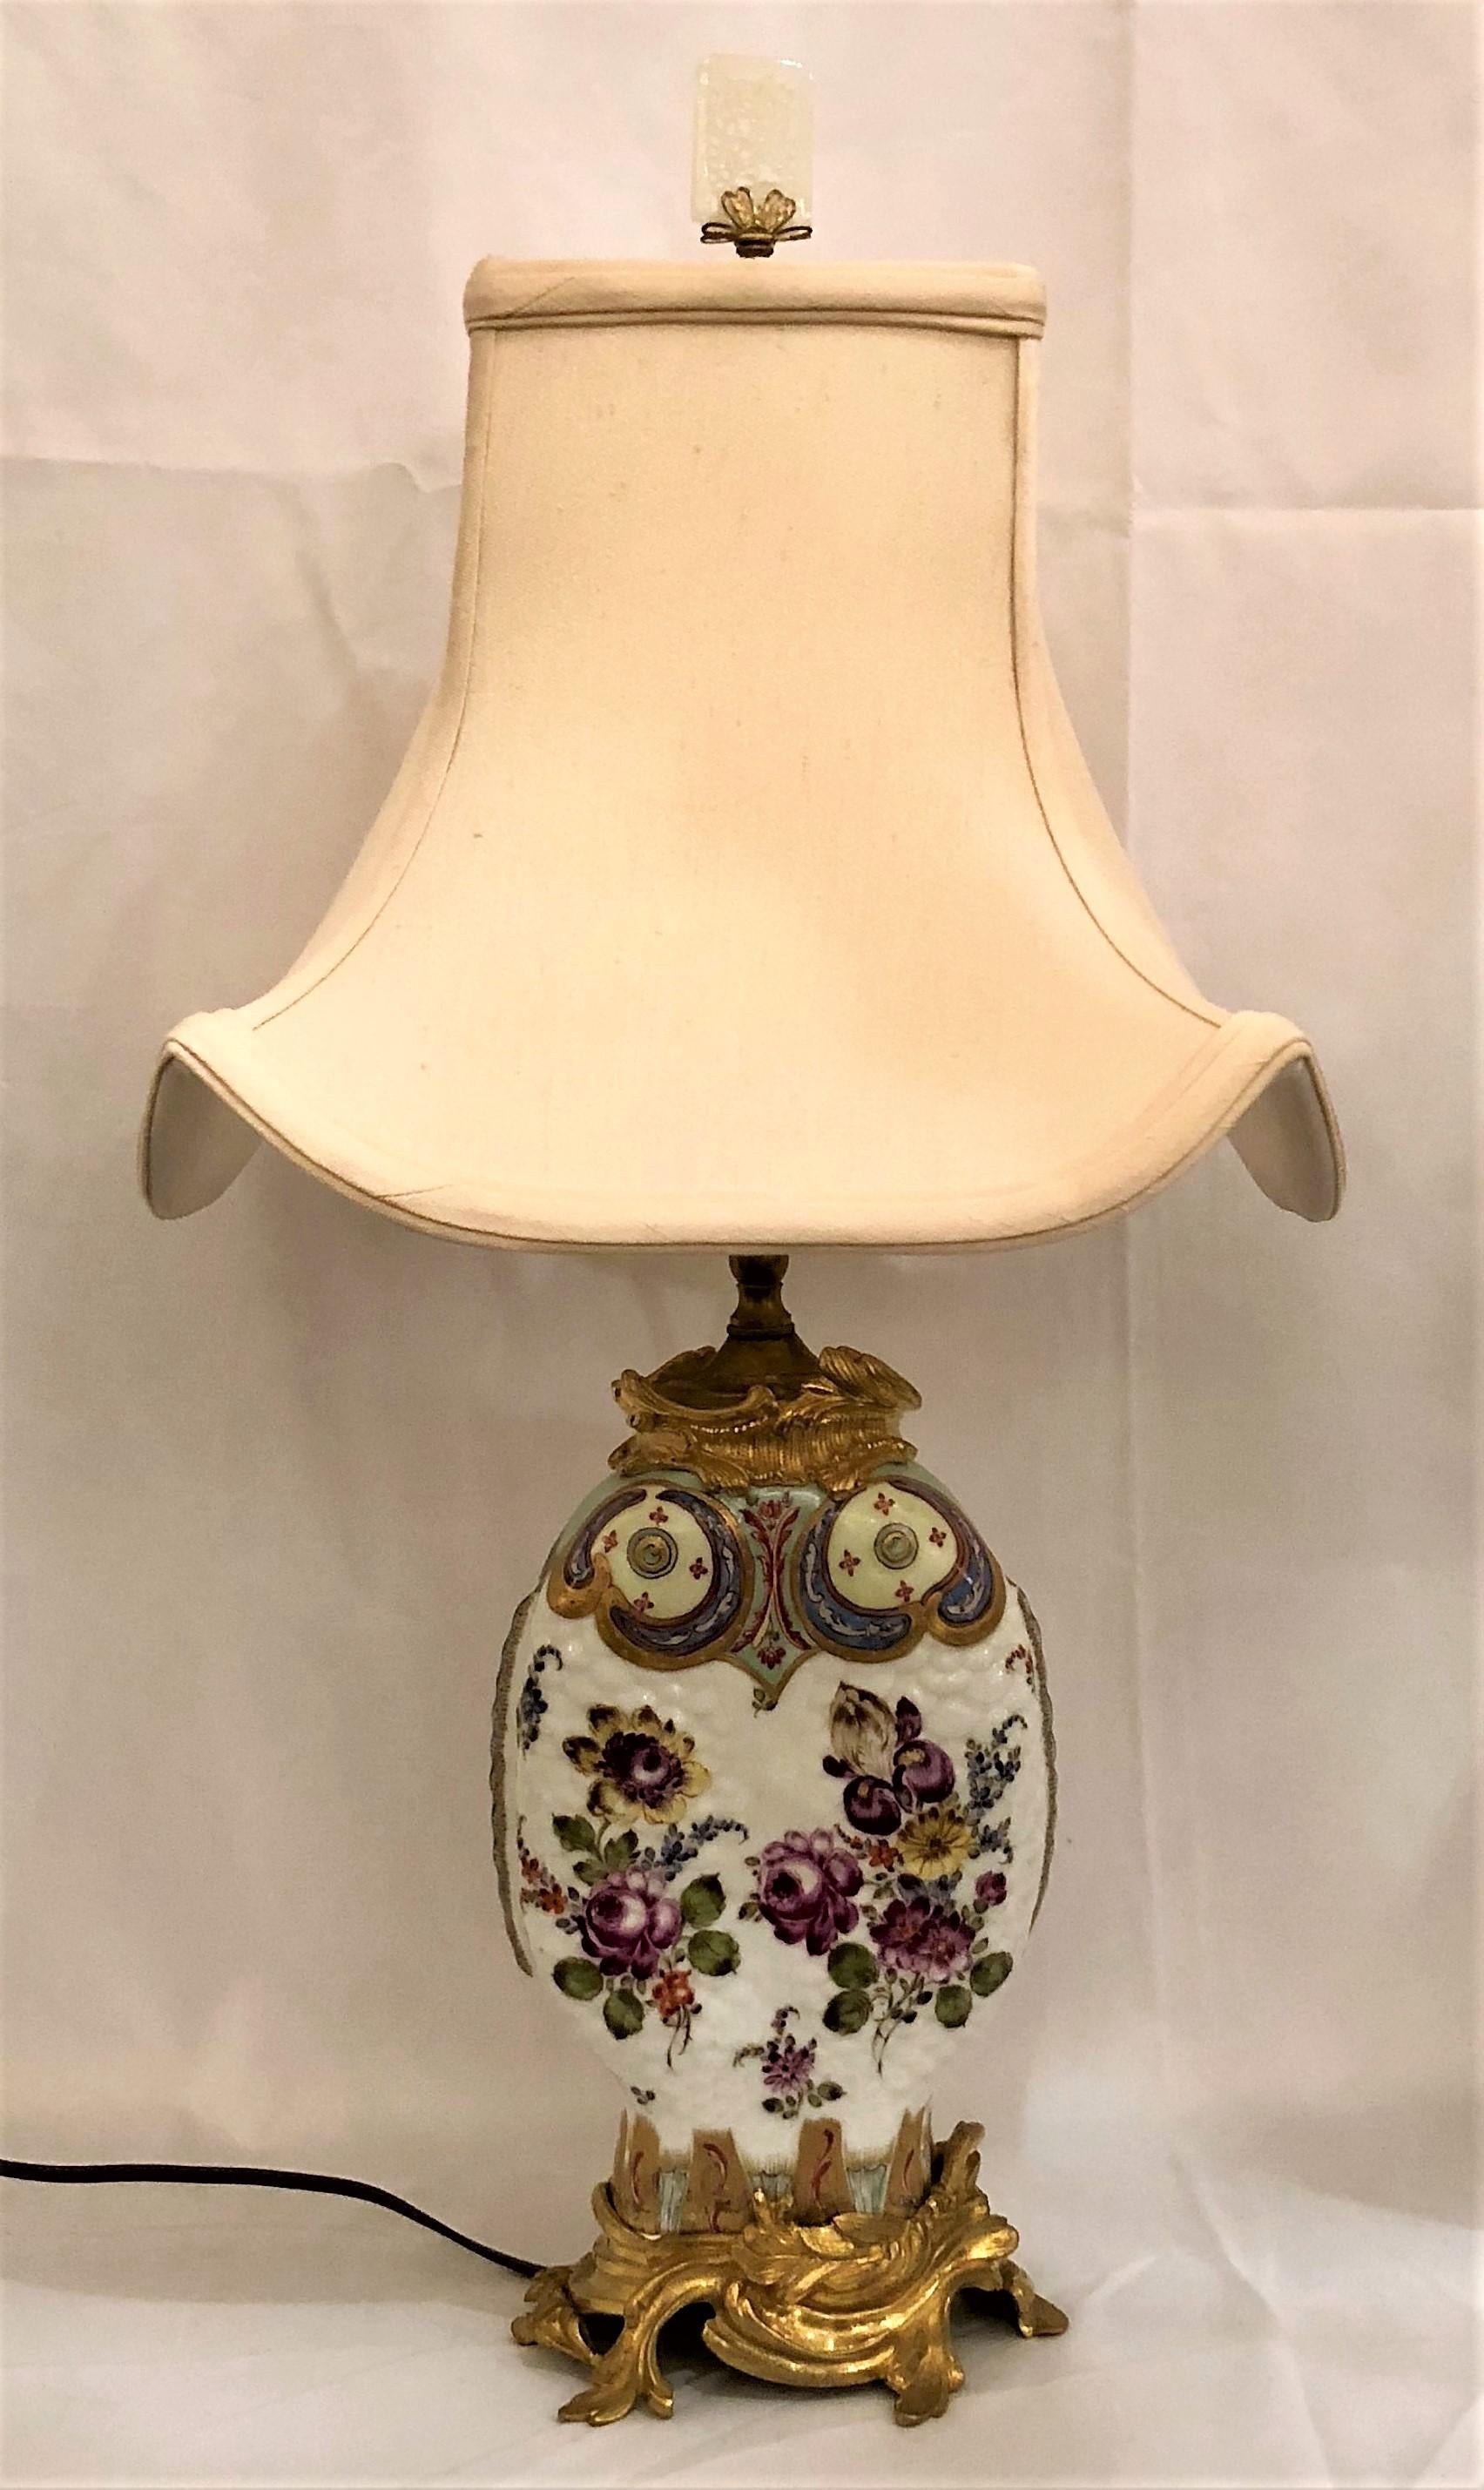 Pair of antique chinoiserie porcelain lamps with ormolu mounts. Possibly Samson. These are very charming with their fish motif and rippled surface as if scales of the fish.